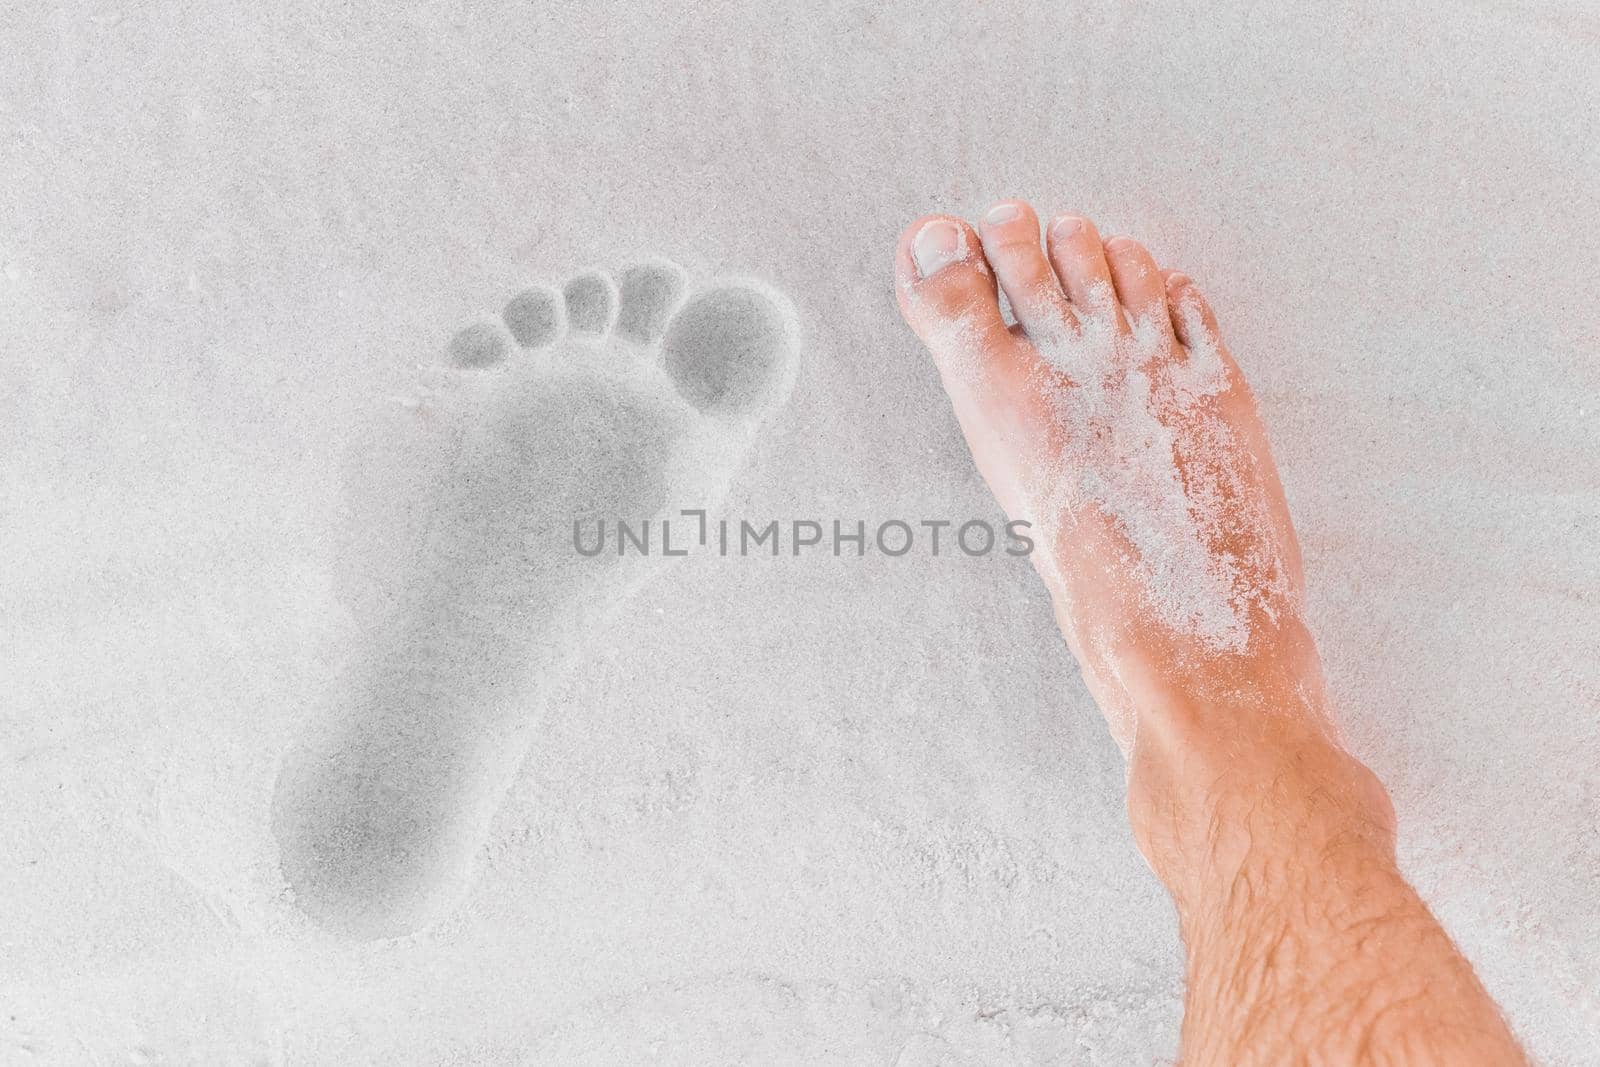 The men's leg stands next to its footprint on the beach sand close-up.